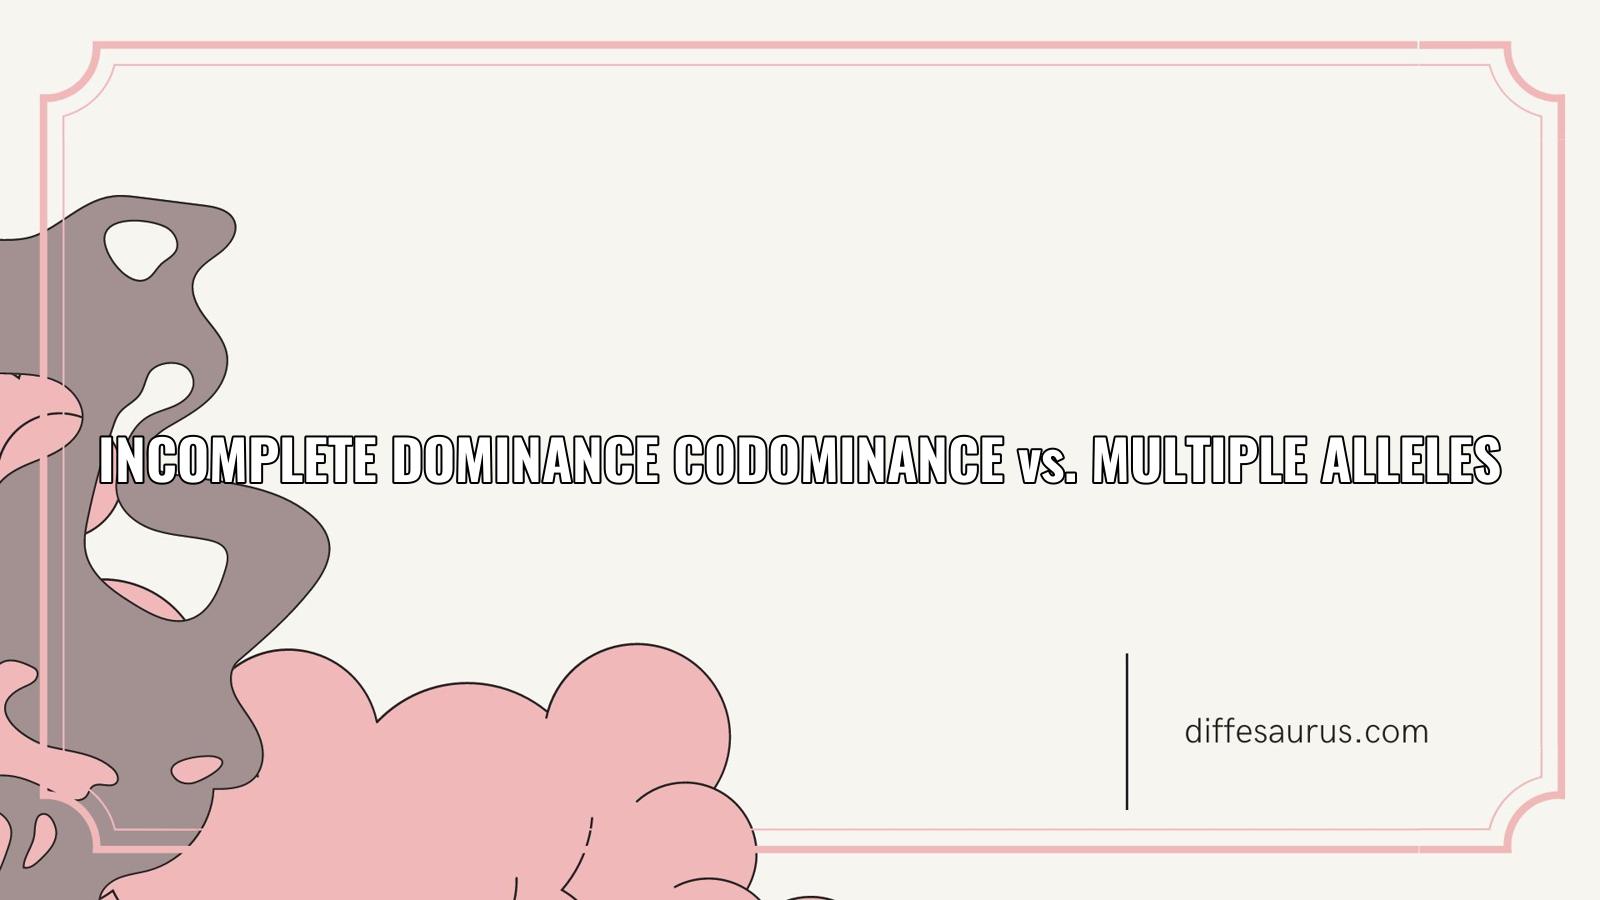 You are currently viewing How do Incomplete Dominance Codominance and Multiple Alleles Differ?